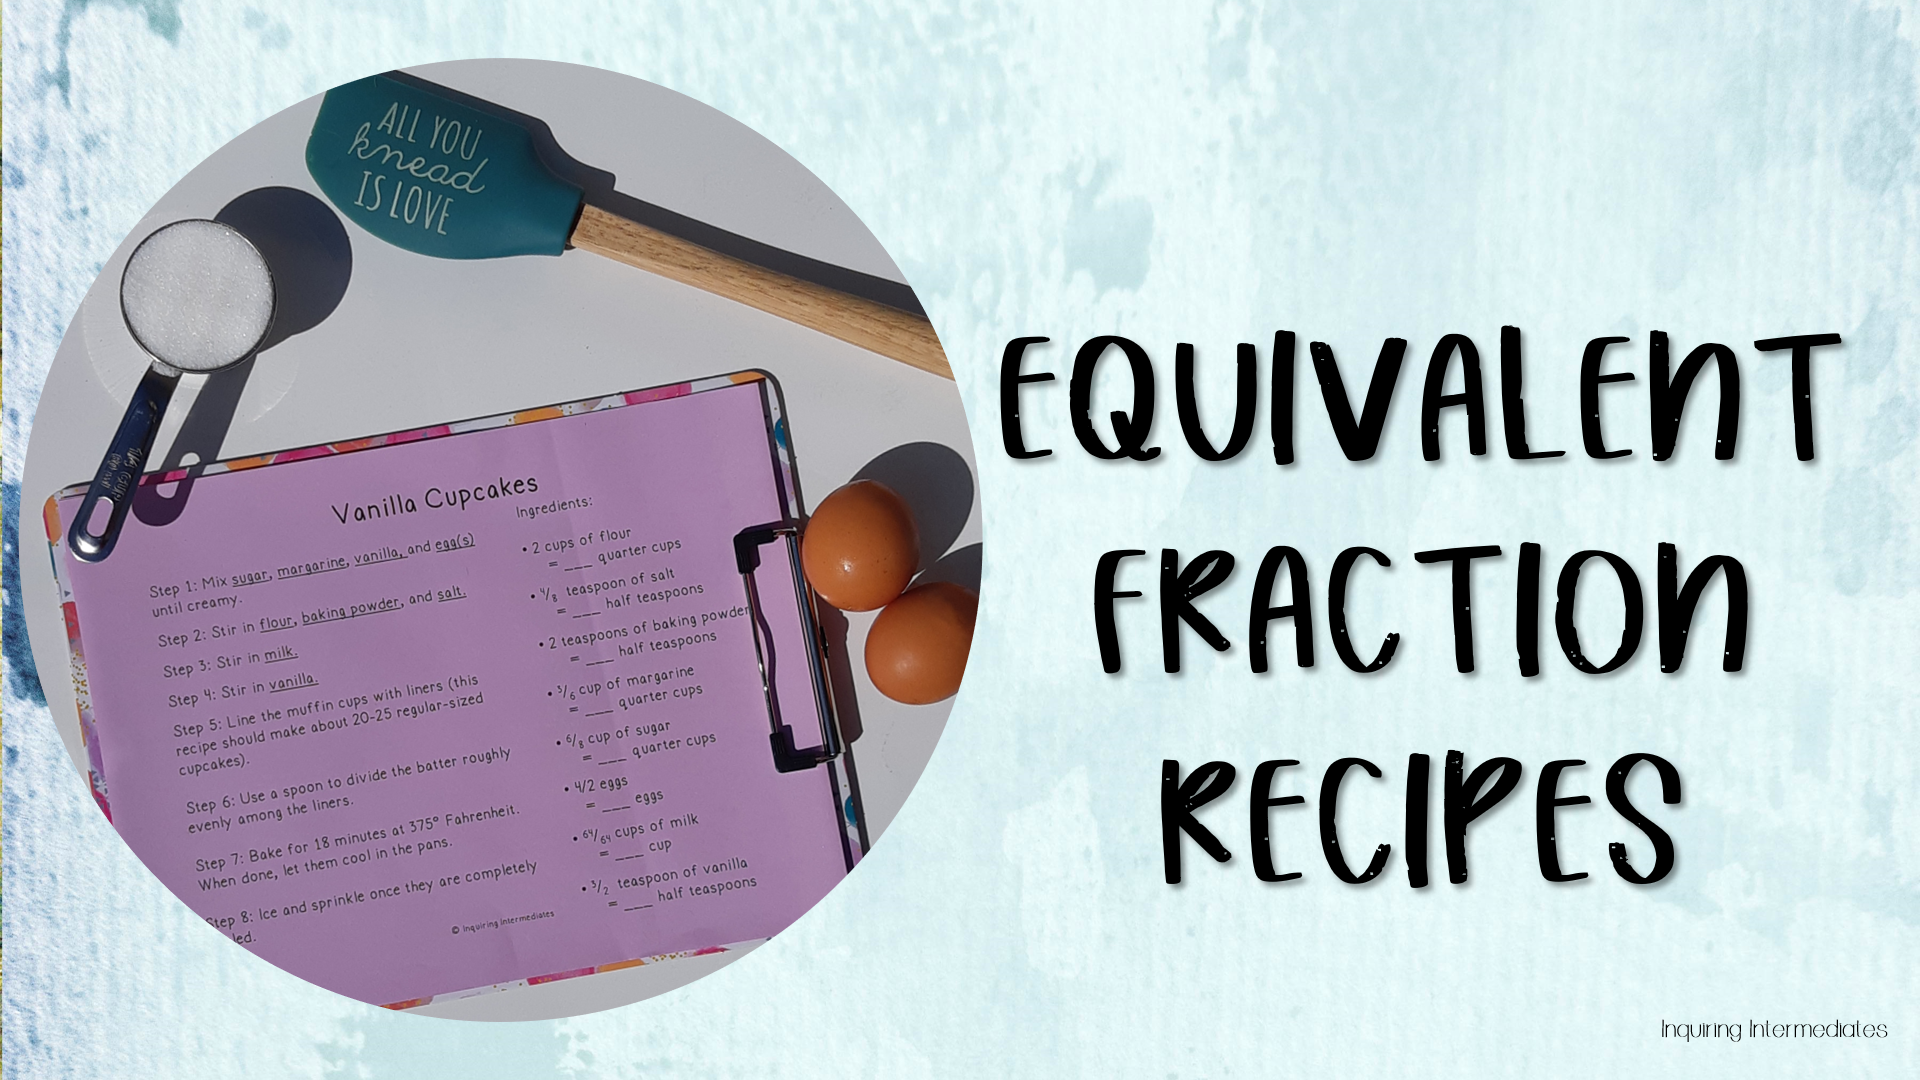 Equivalent fraction recipes